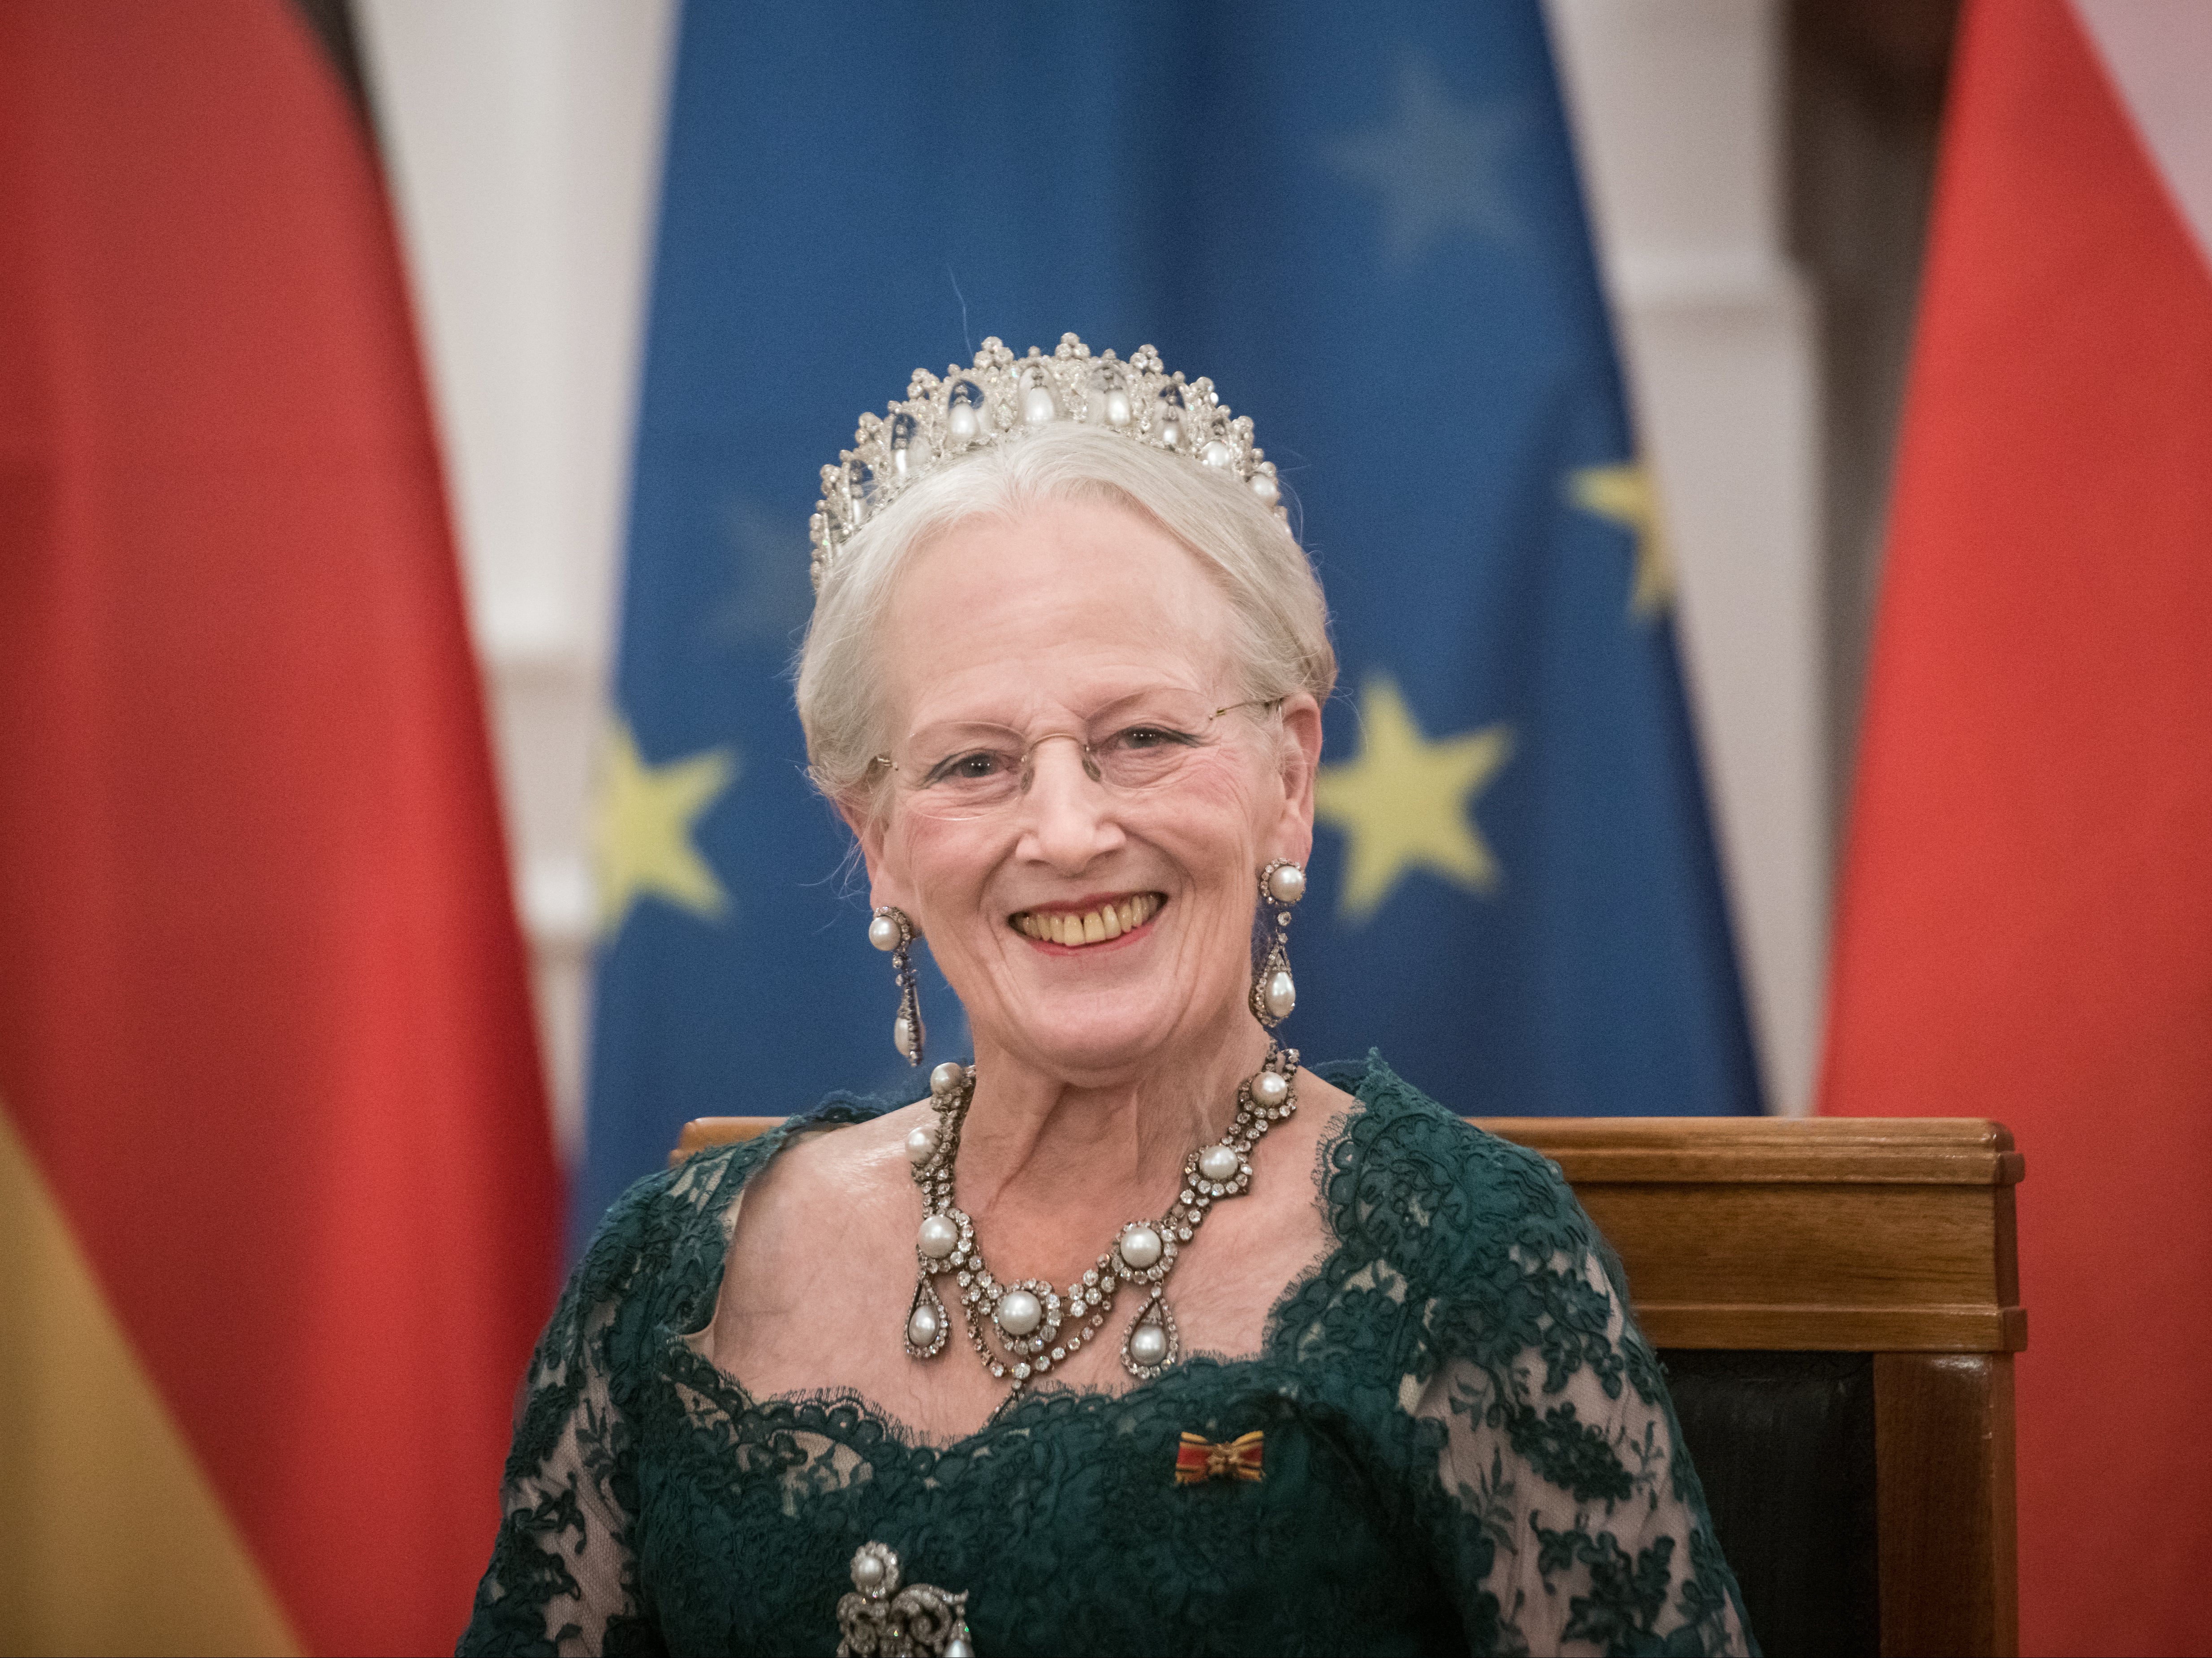 Queen Margrethe II reflects on decision to strip four grandchildren of royal titles